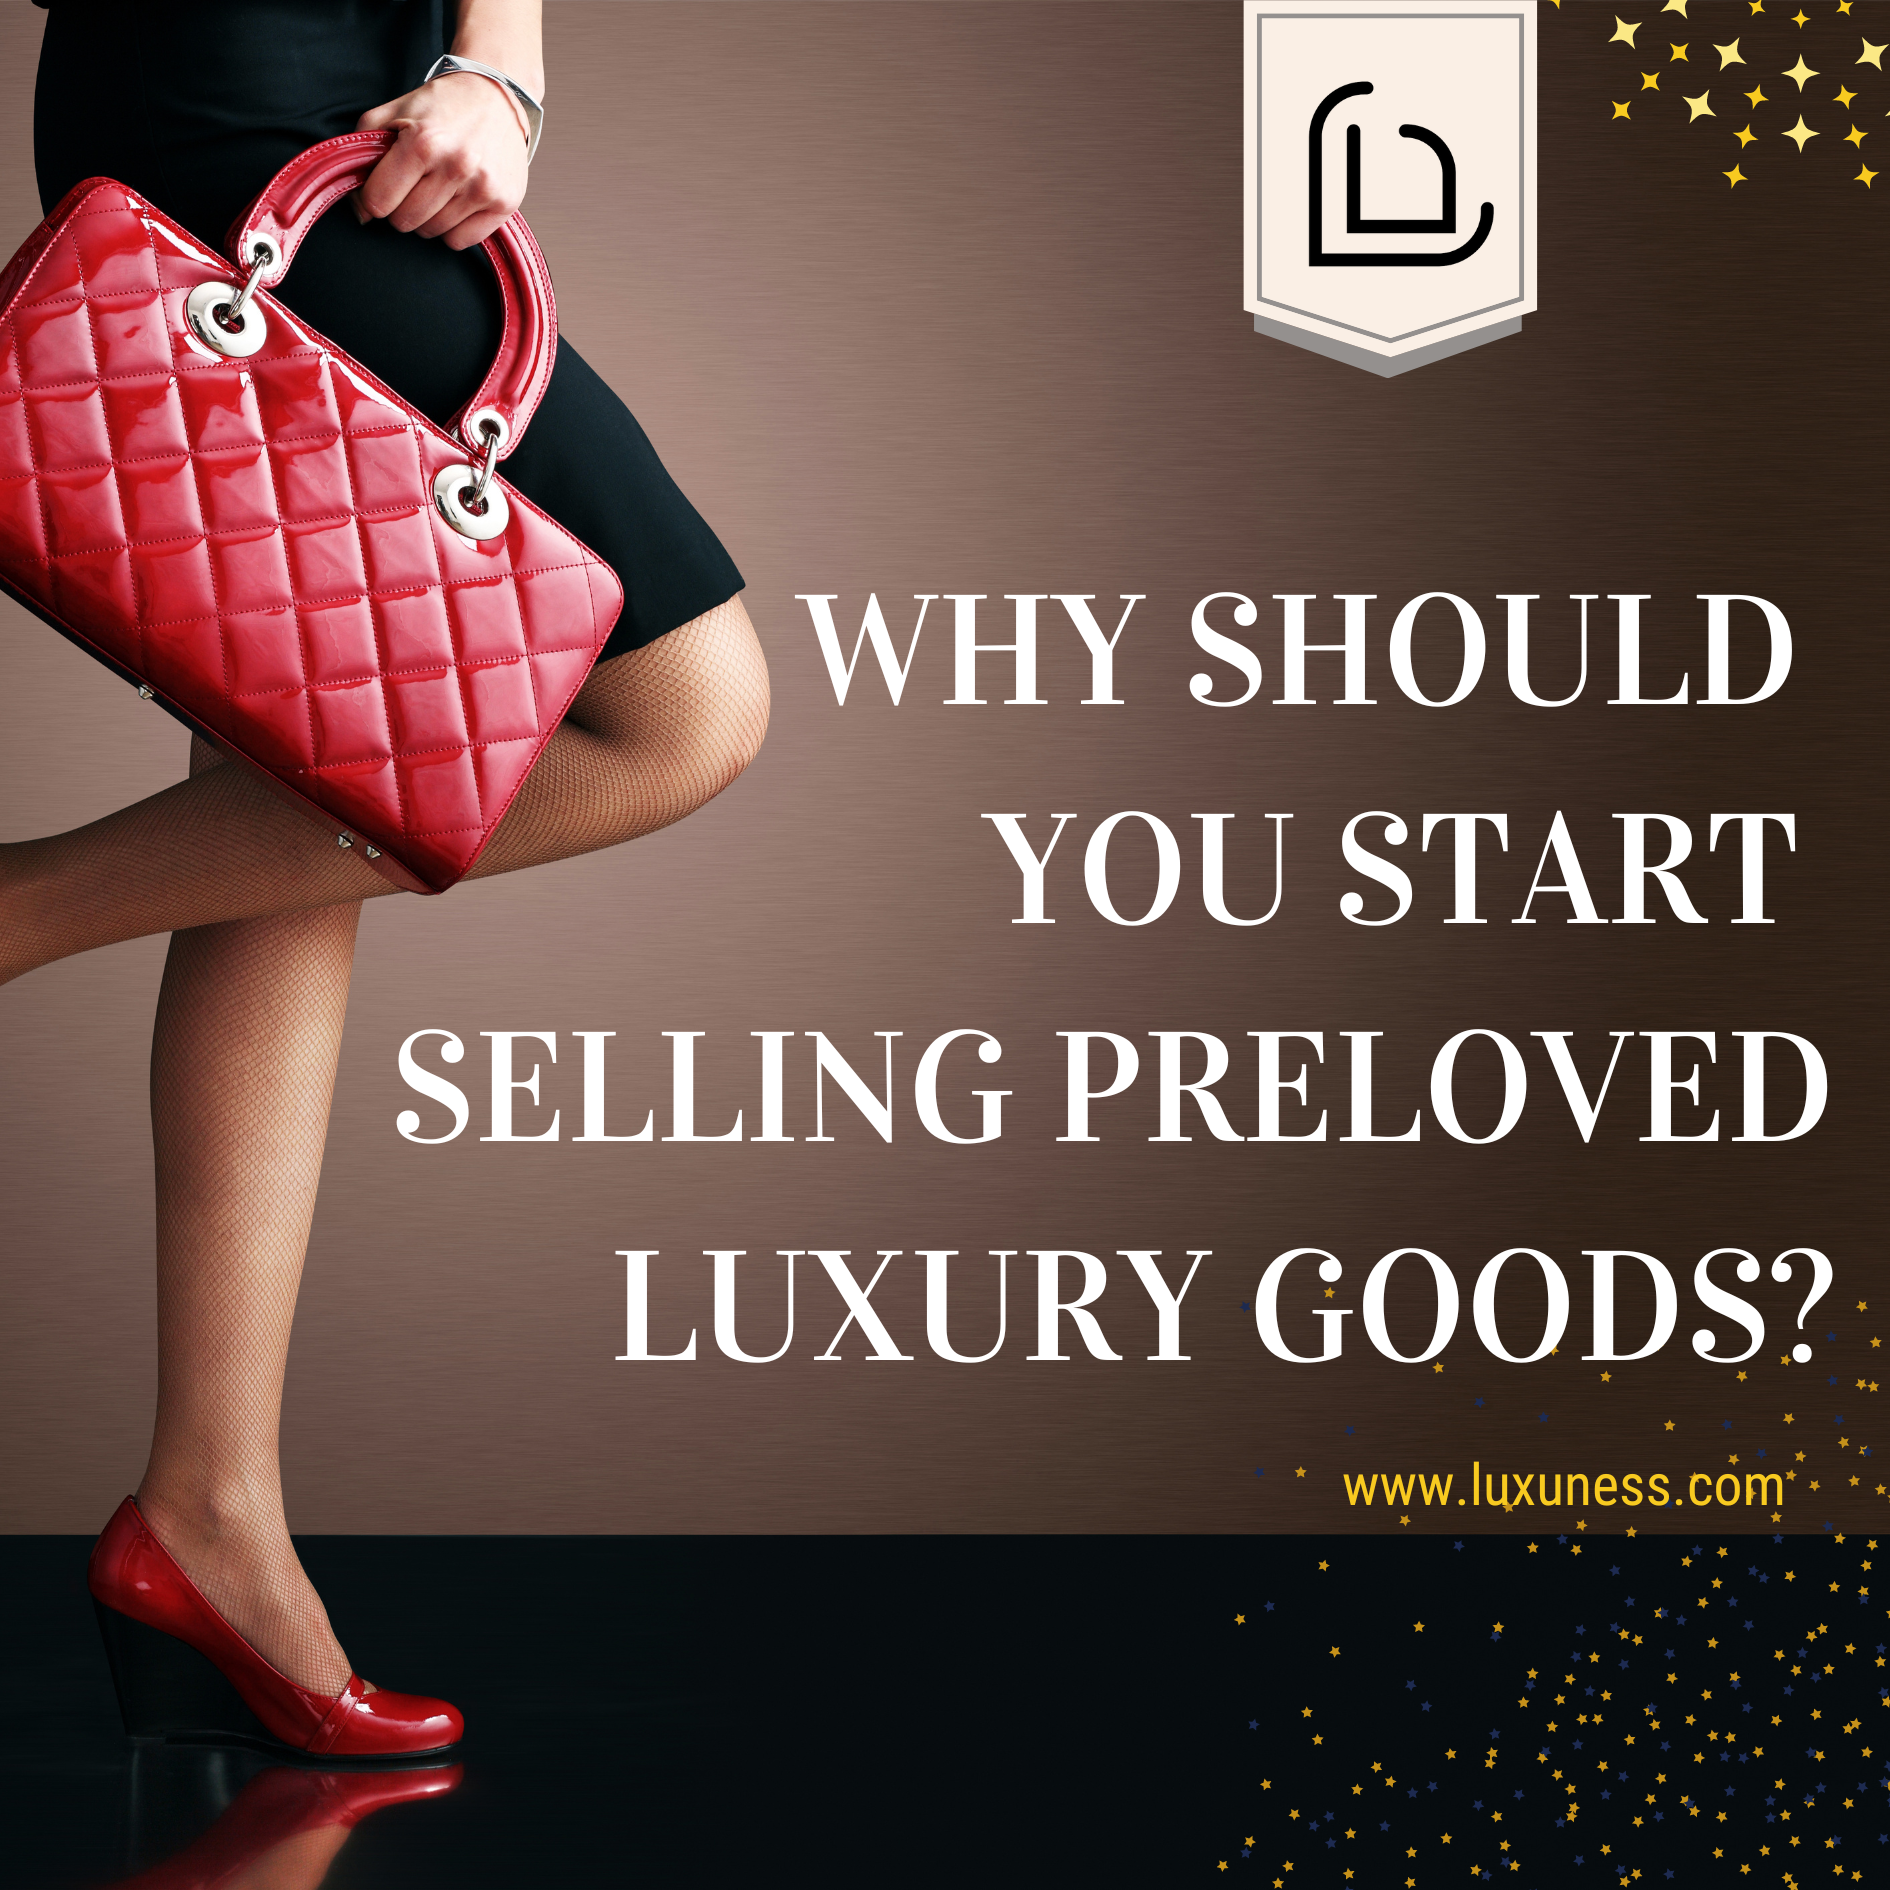 Why Should You Start Selling Preloved Luxury Goods?